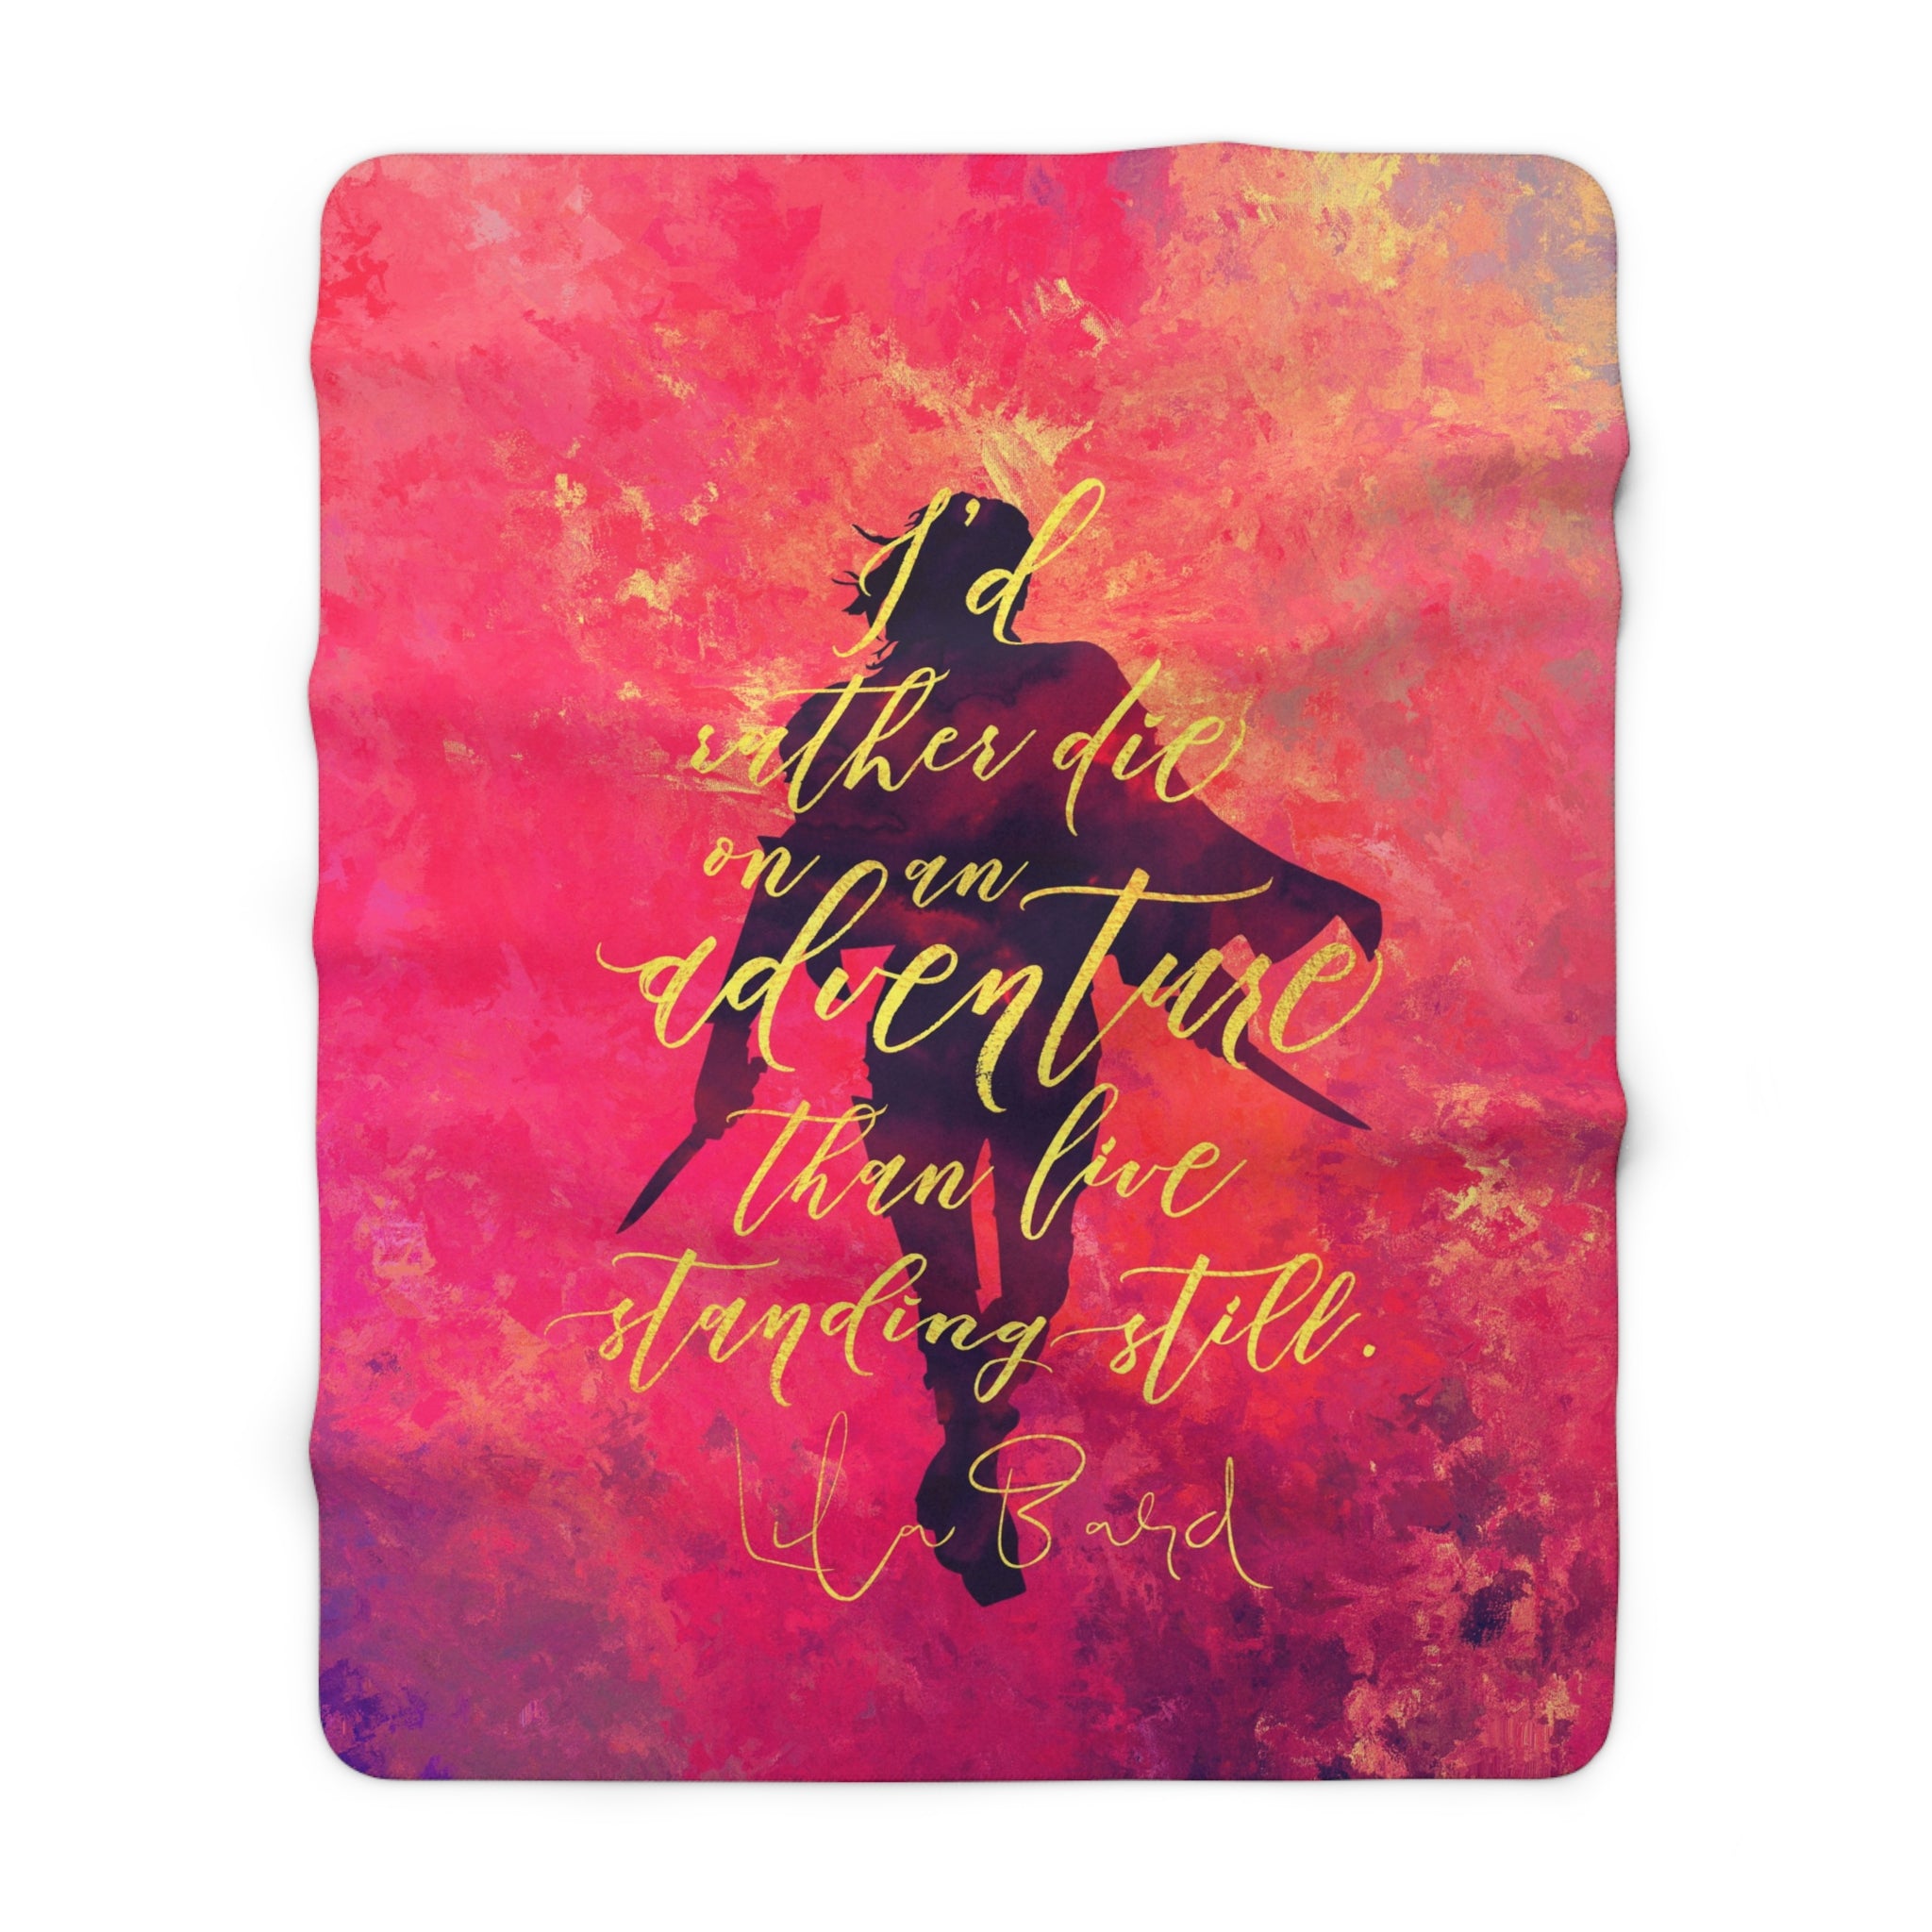 I'd rather die on an adventure... Lila Bard Throw Blanket